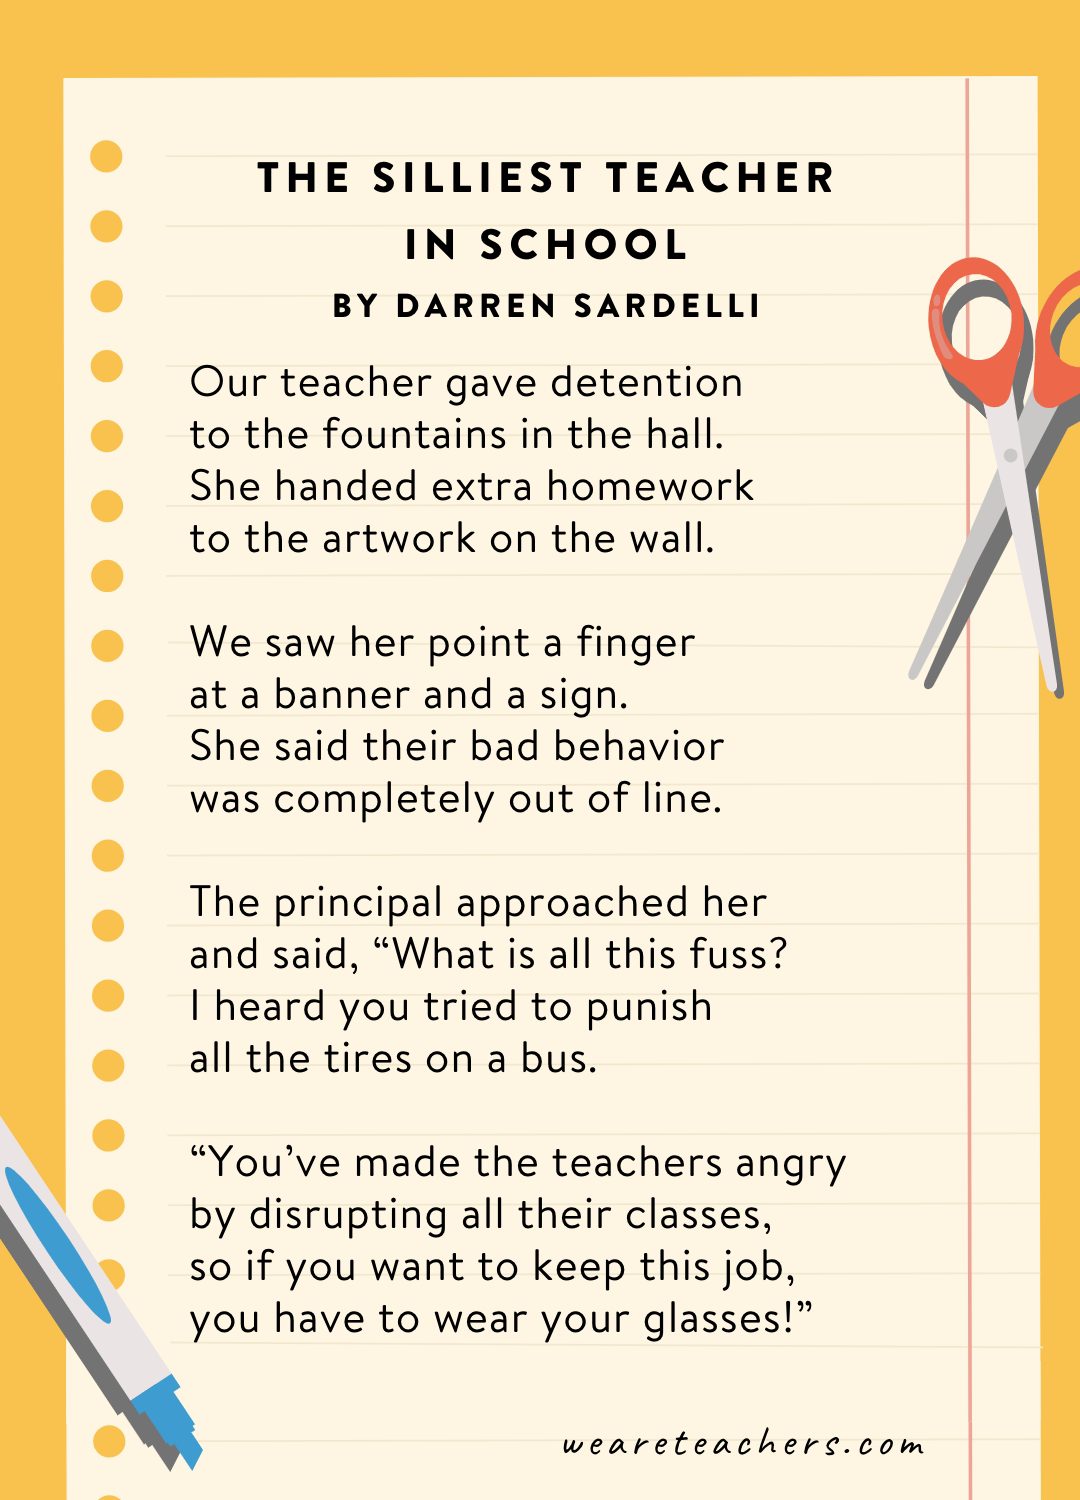 40 of Our Favorite Poems About Teaching - Quilland Arrow Press